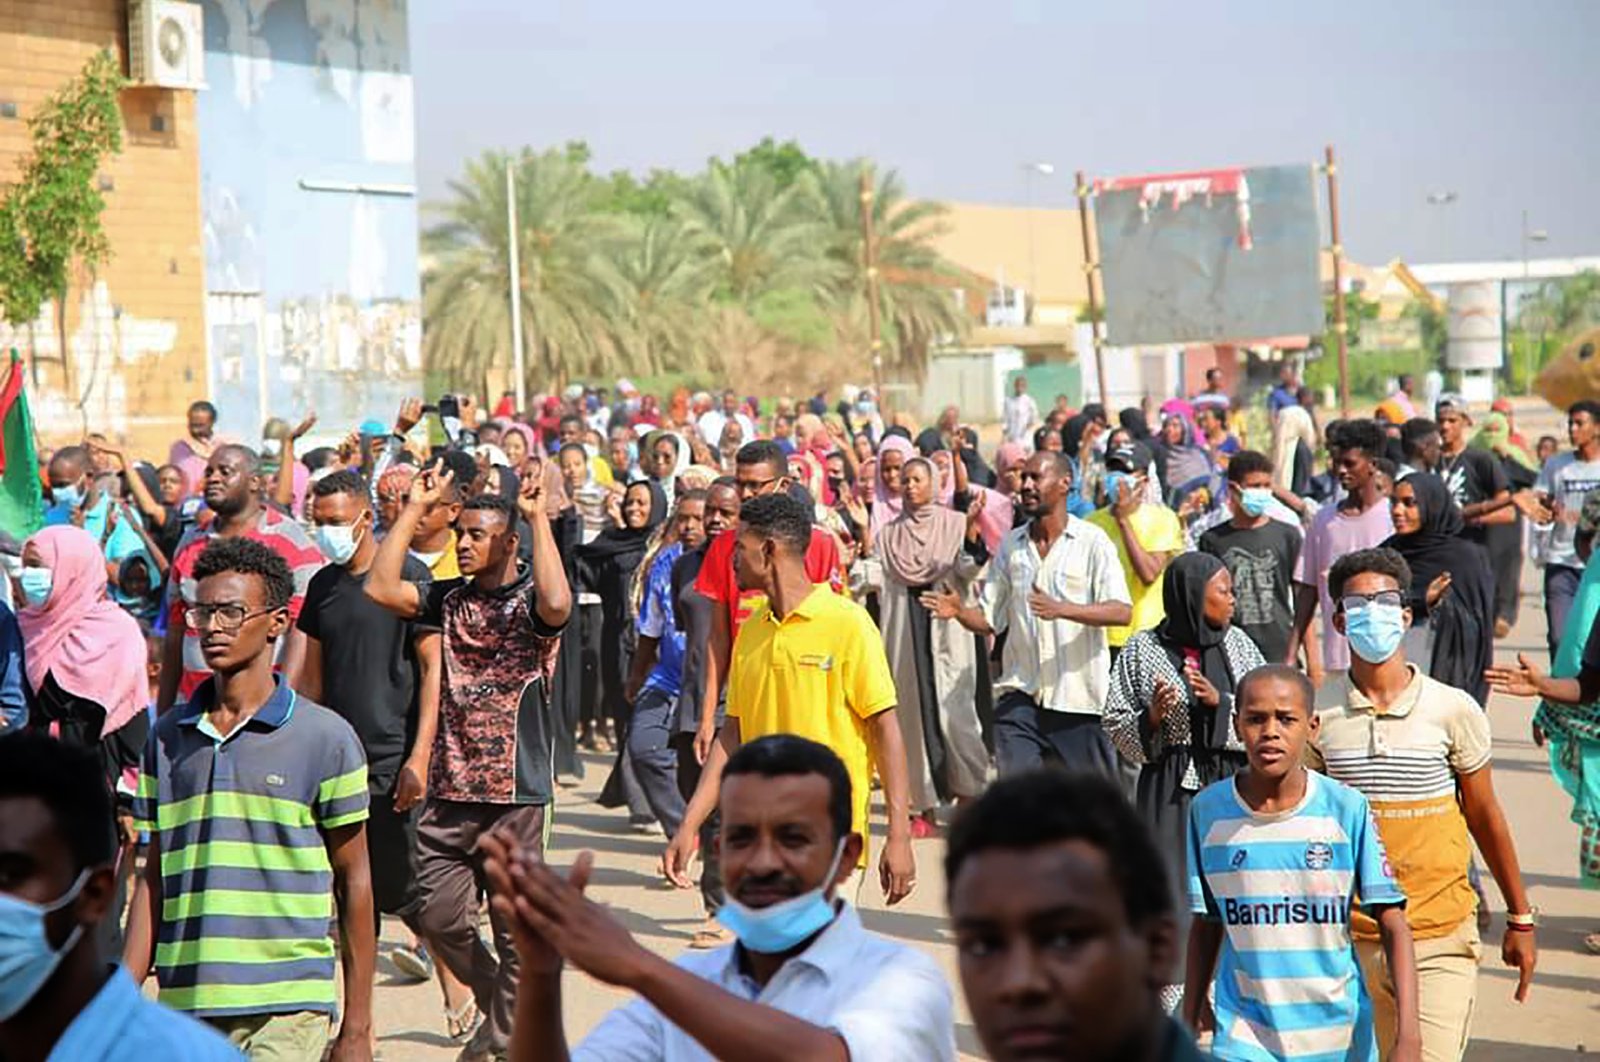 Thousands of pro-democracy protesters take to the streets to condemn a takeover by military officials in Khartoum, Sudan, Oct. 25, 2021. (AP Photo)